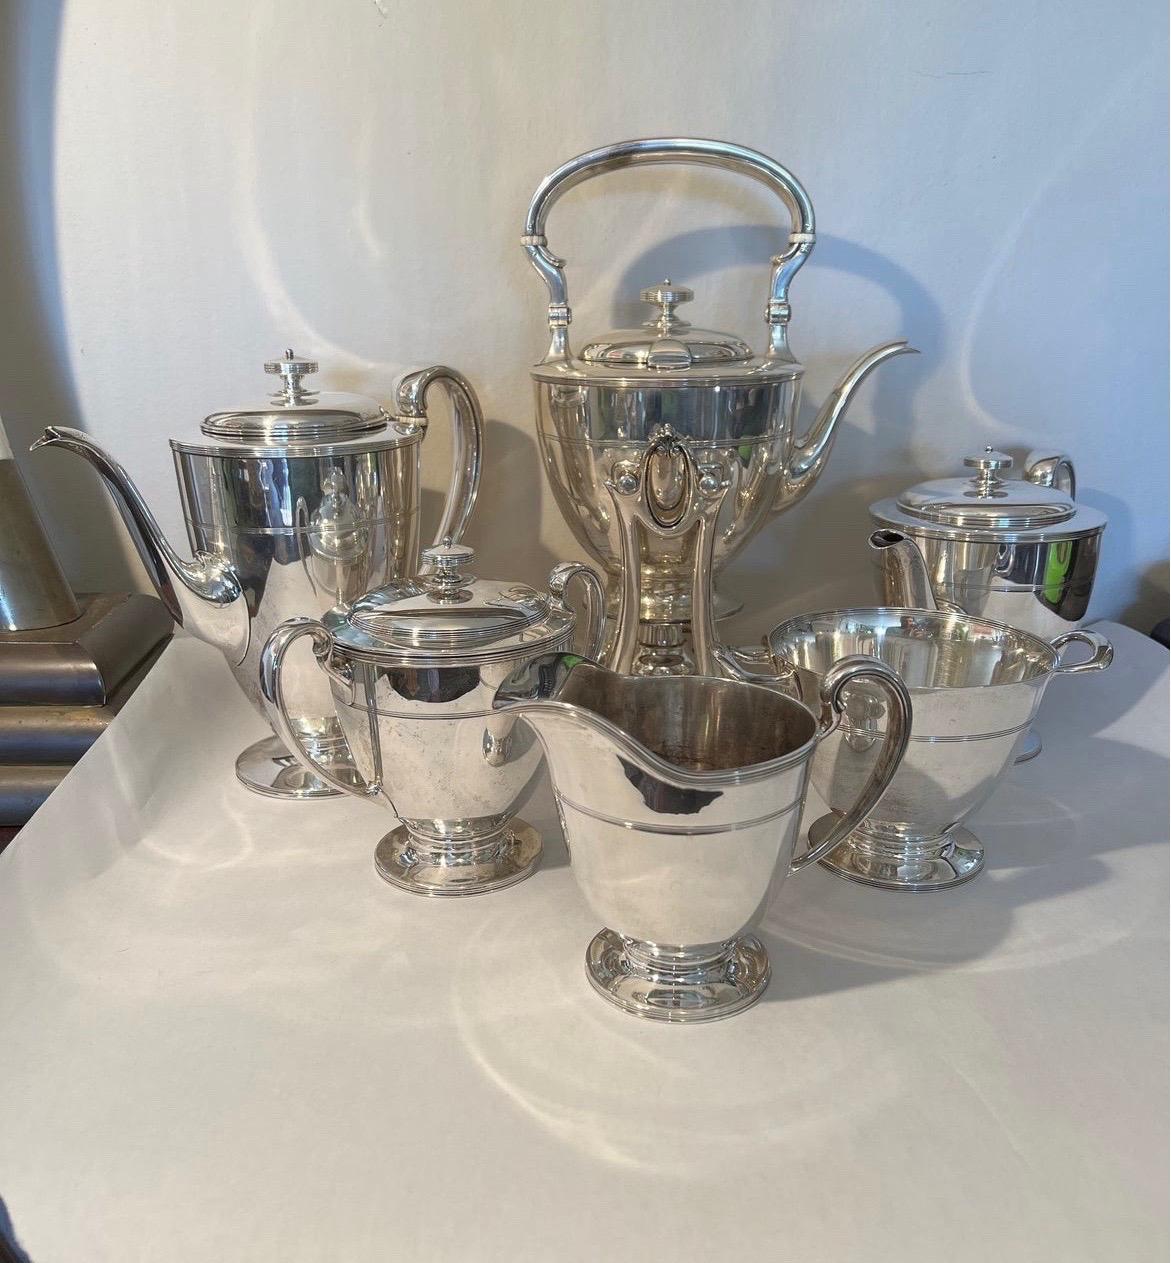 An exceptionally rare Tiffany & Company Sterling silver tea and coffee service in the hampton pattern with extra custom line work engraving. Very early set, not a new production! 
Including:
Coffee pot - 9” h x 9.5” d x 5” w 892g
Teapot - 6.75” h